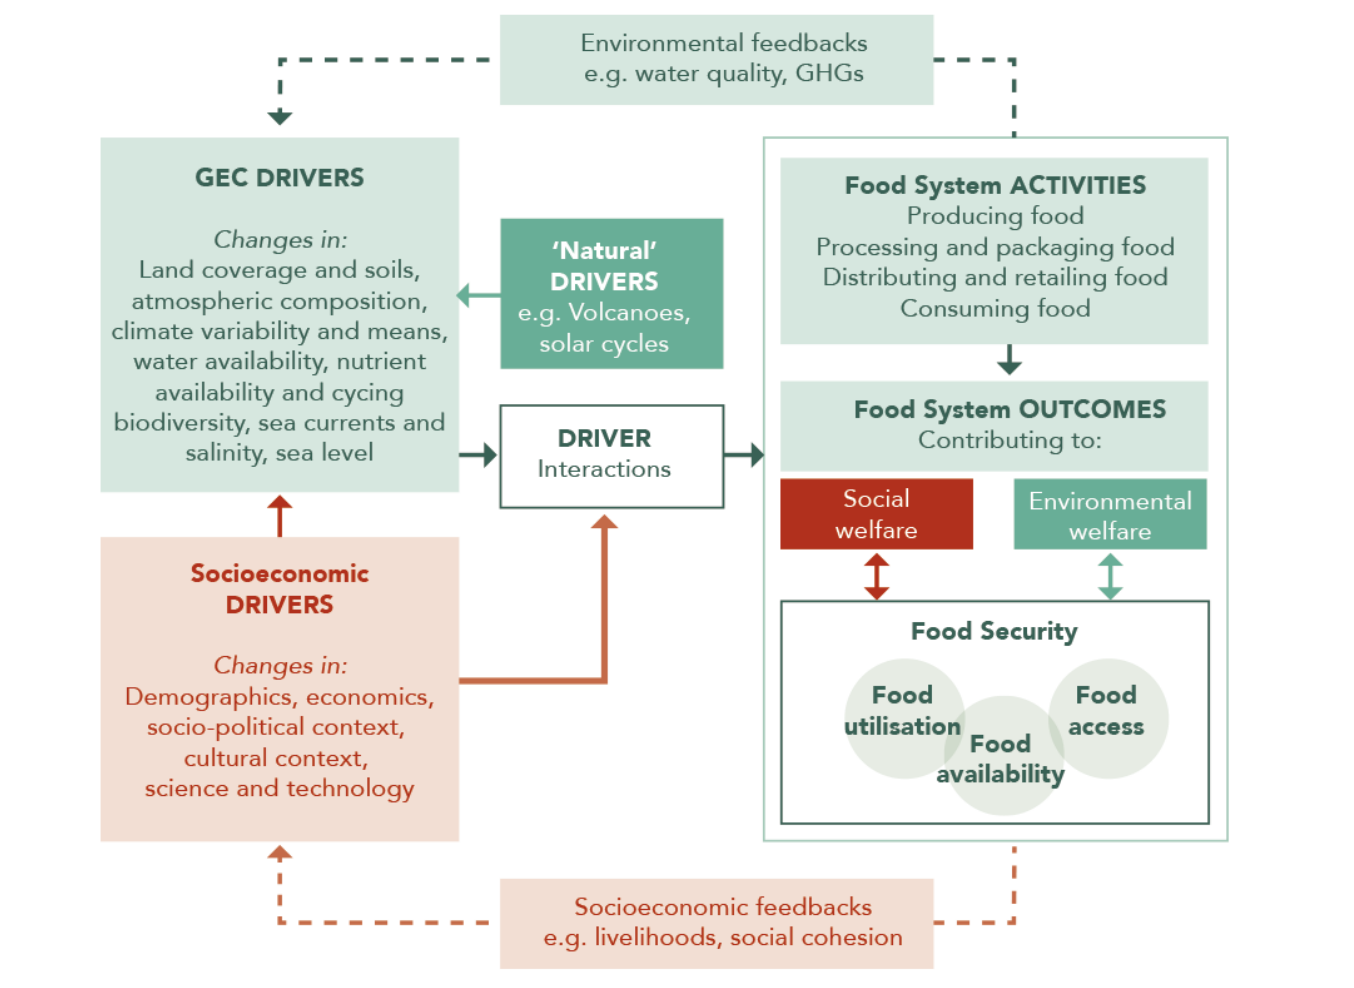 Figure 3: A food system diagram showing drivers of change and relationship with food system outcomes.